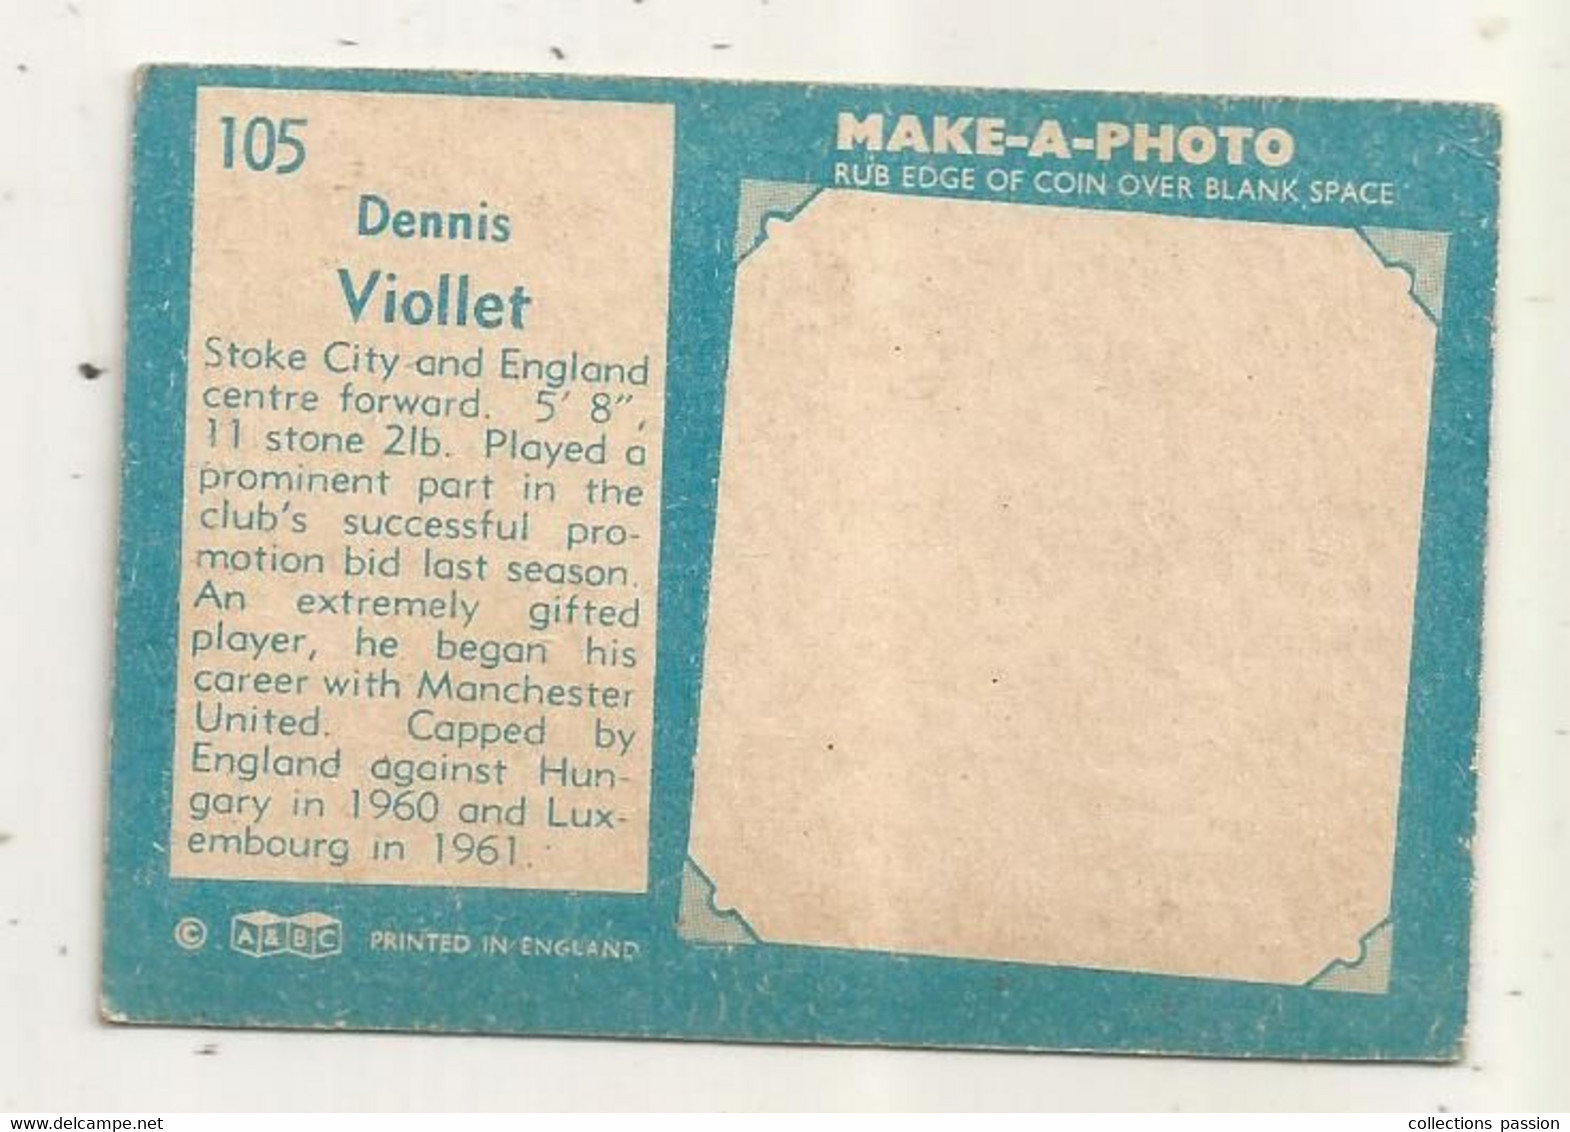 Trading Card , A&BC , England, Chewing Gum, Serie: Make A Photo , Année 60 , N° 105, DENNIS VIOLLET, Stoke City - Trading Cards